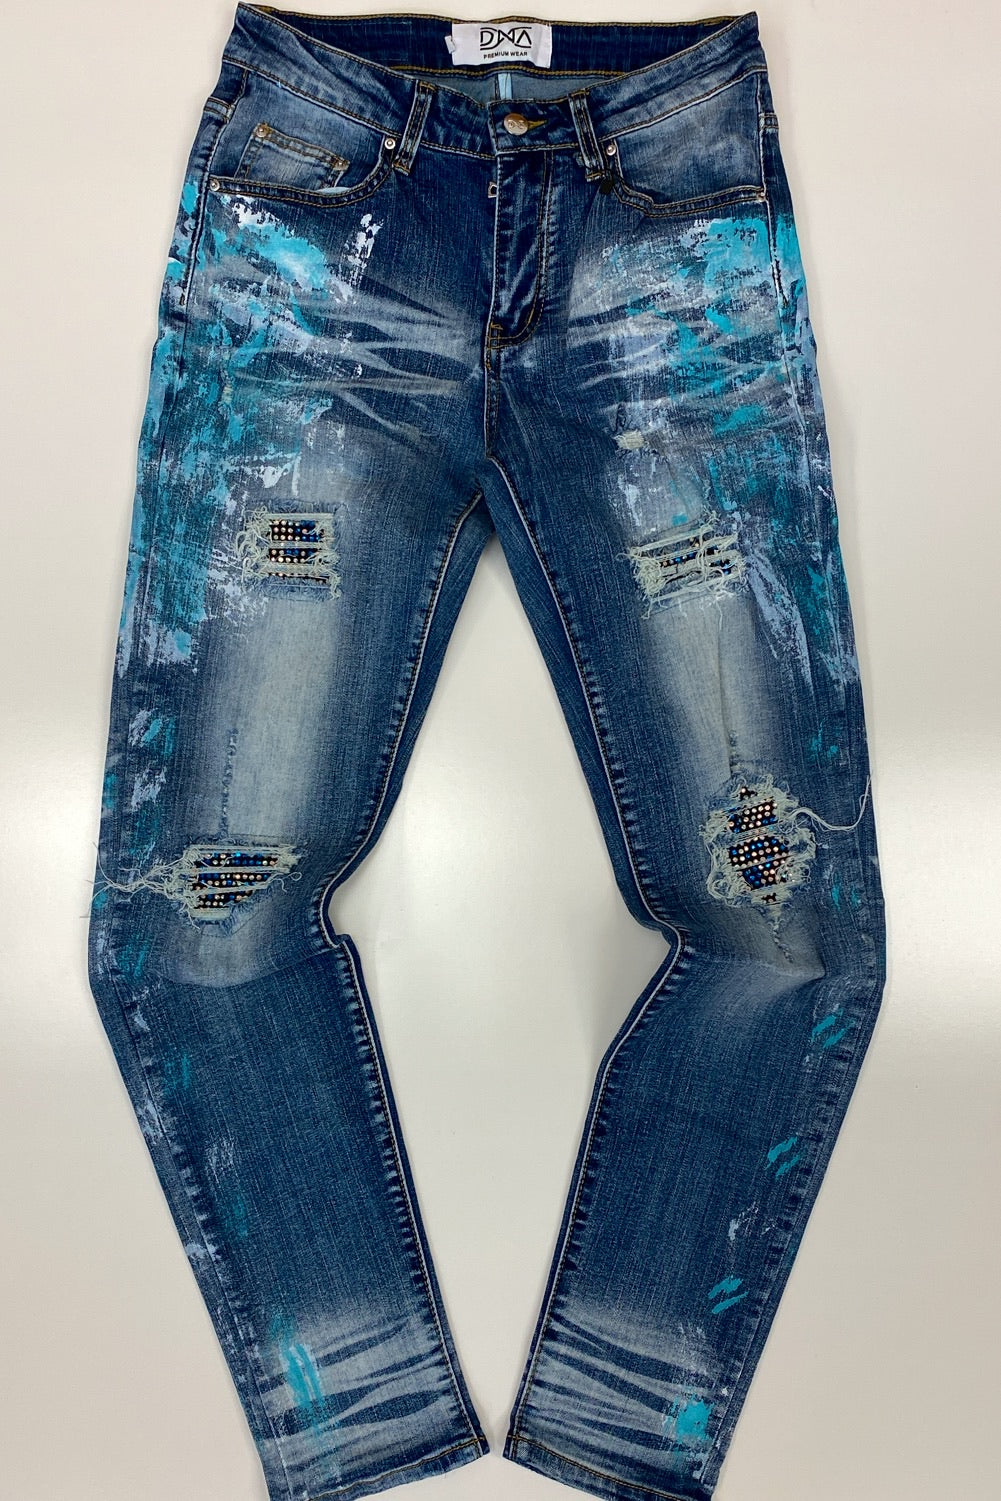 Dna Premium Wear- studded color patch jeans w/ blue and white paint ...